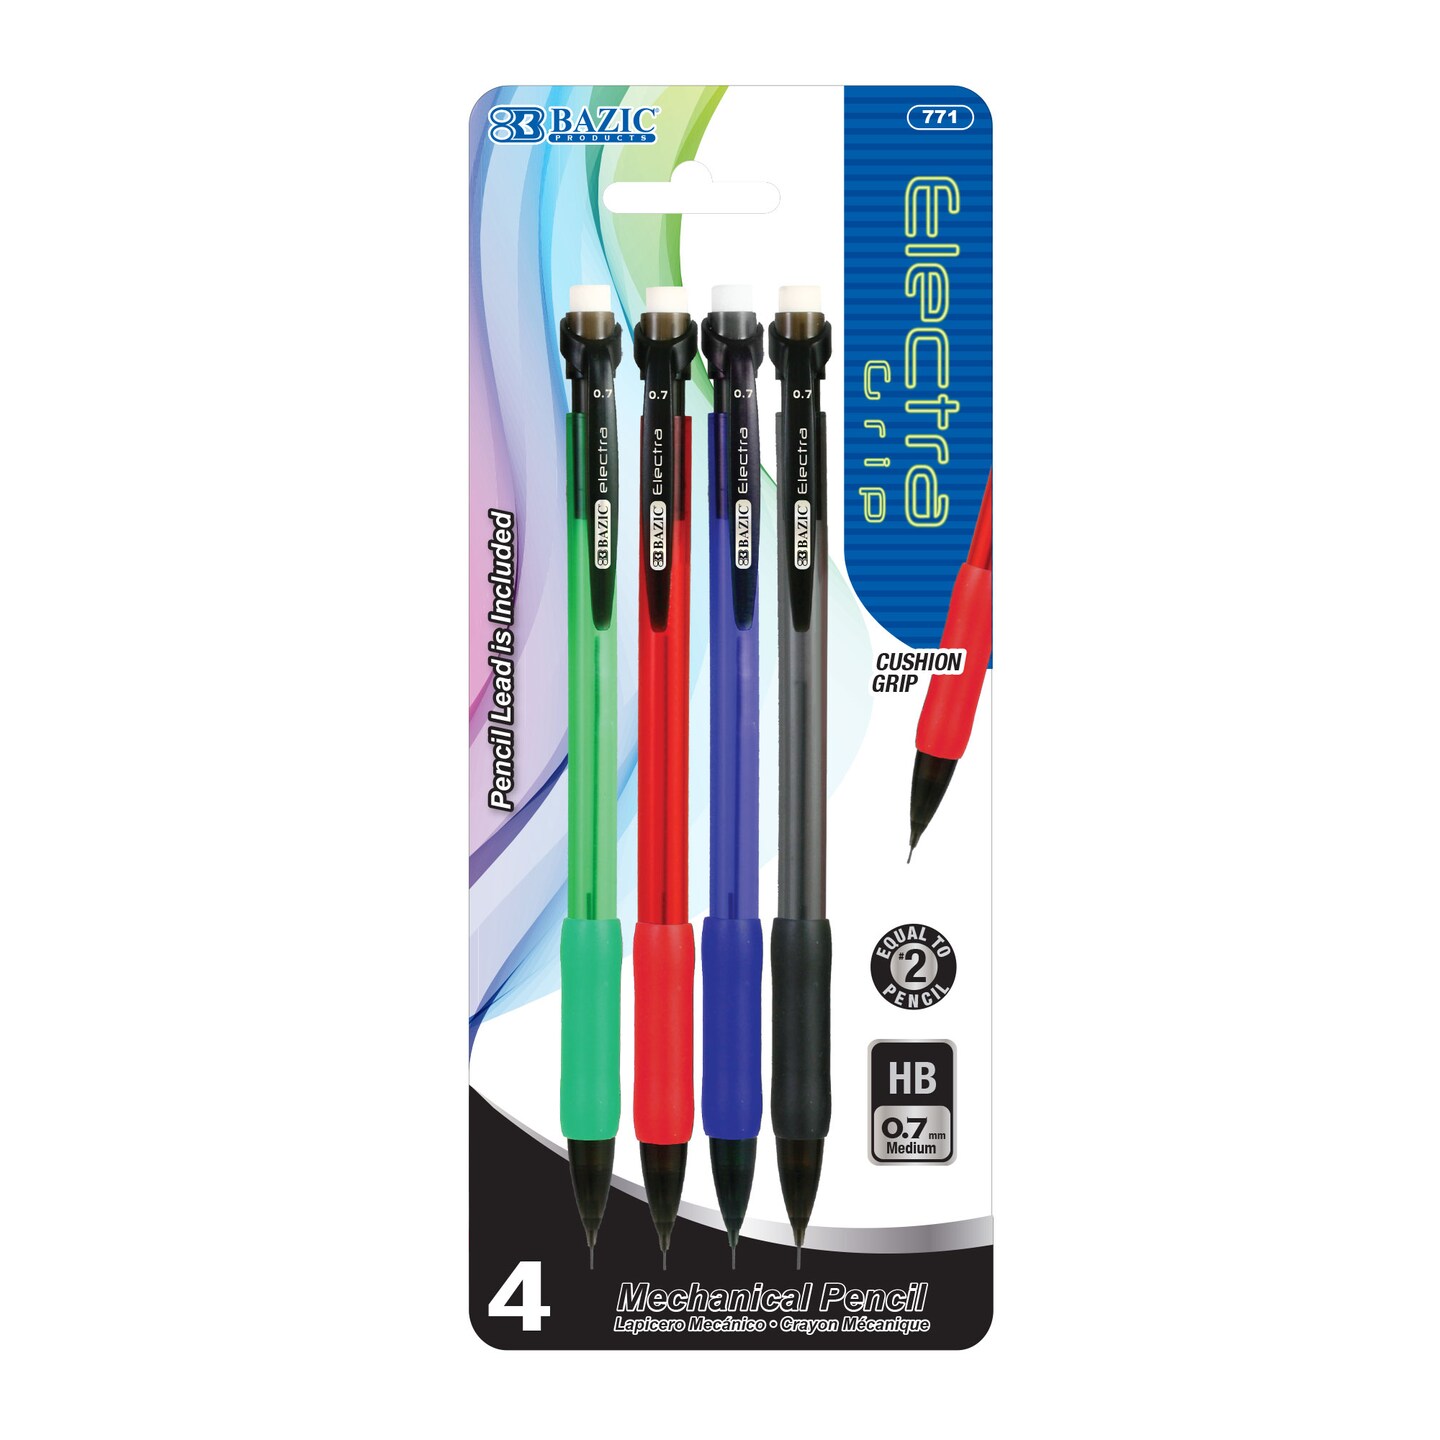 BAZIC 0.7 mm Electra Mechanical Pencil with Grip (4/Pack)